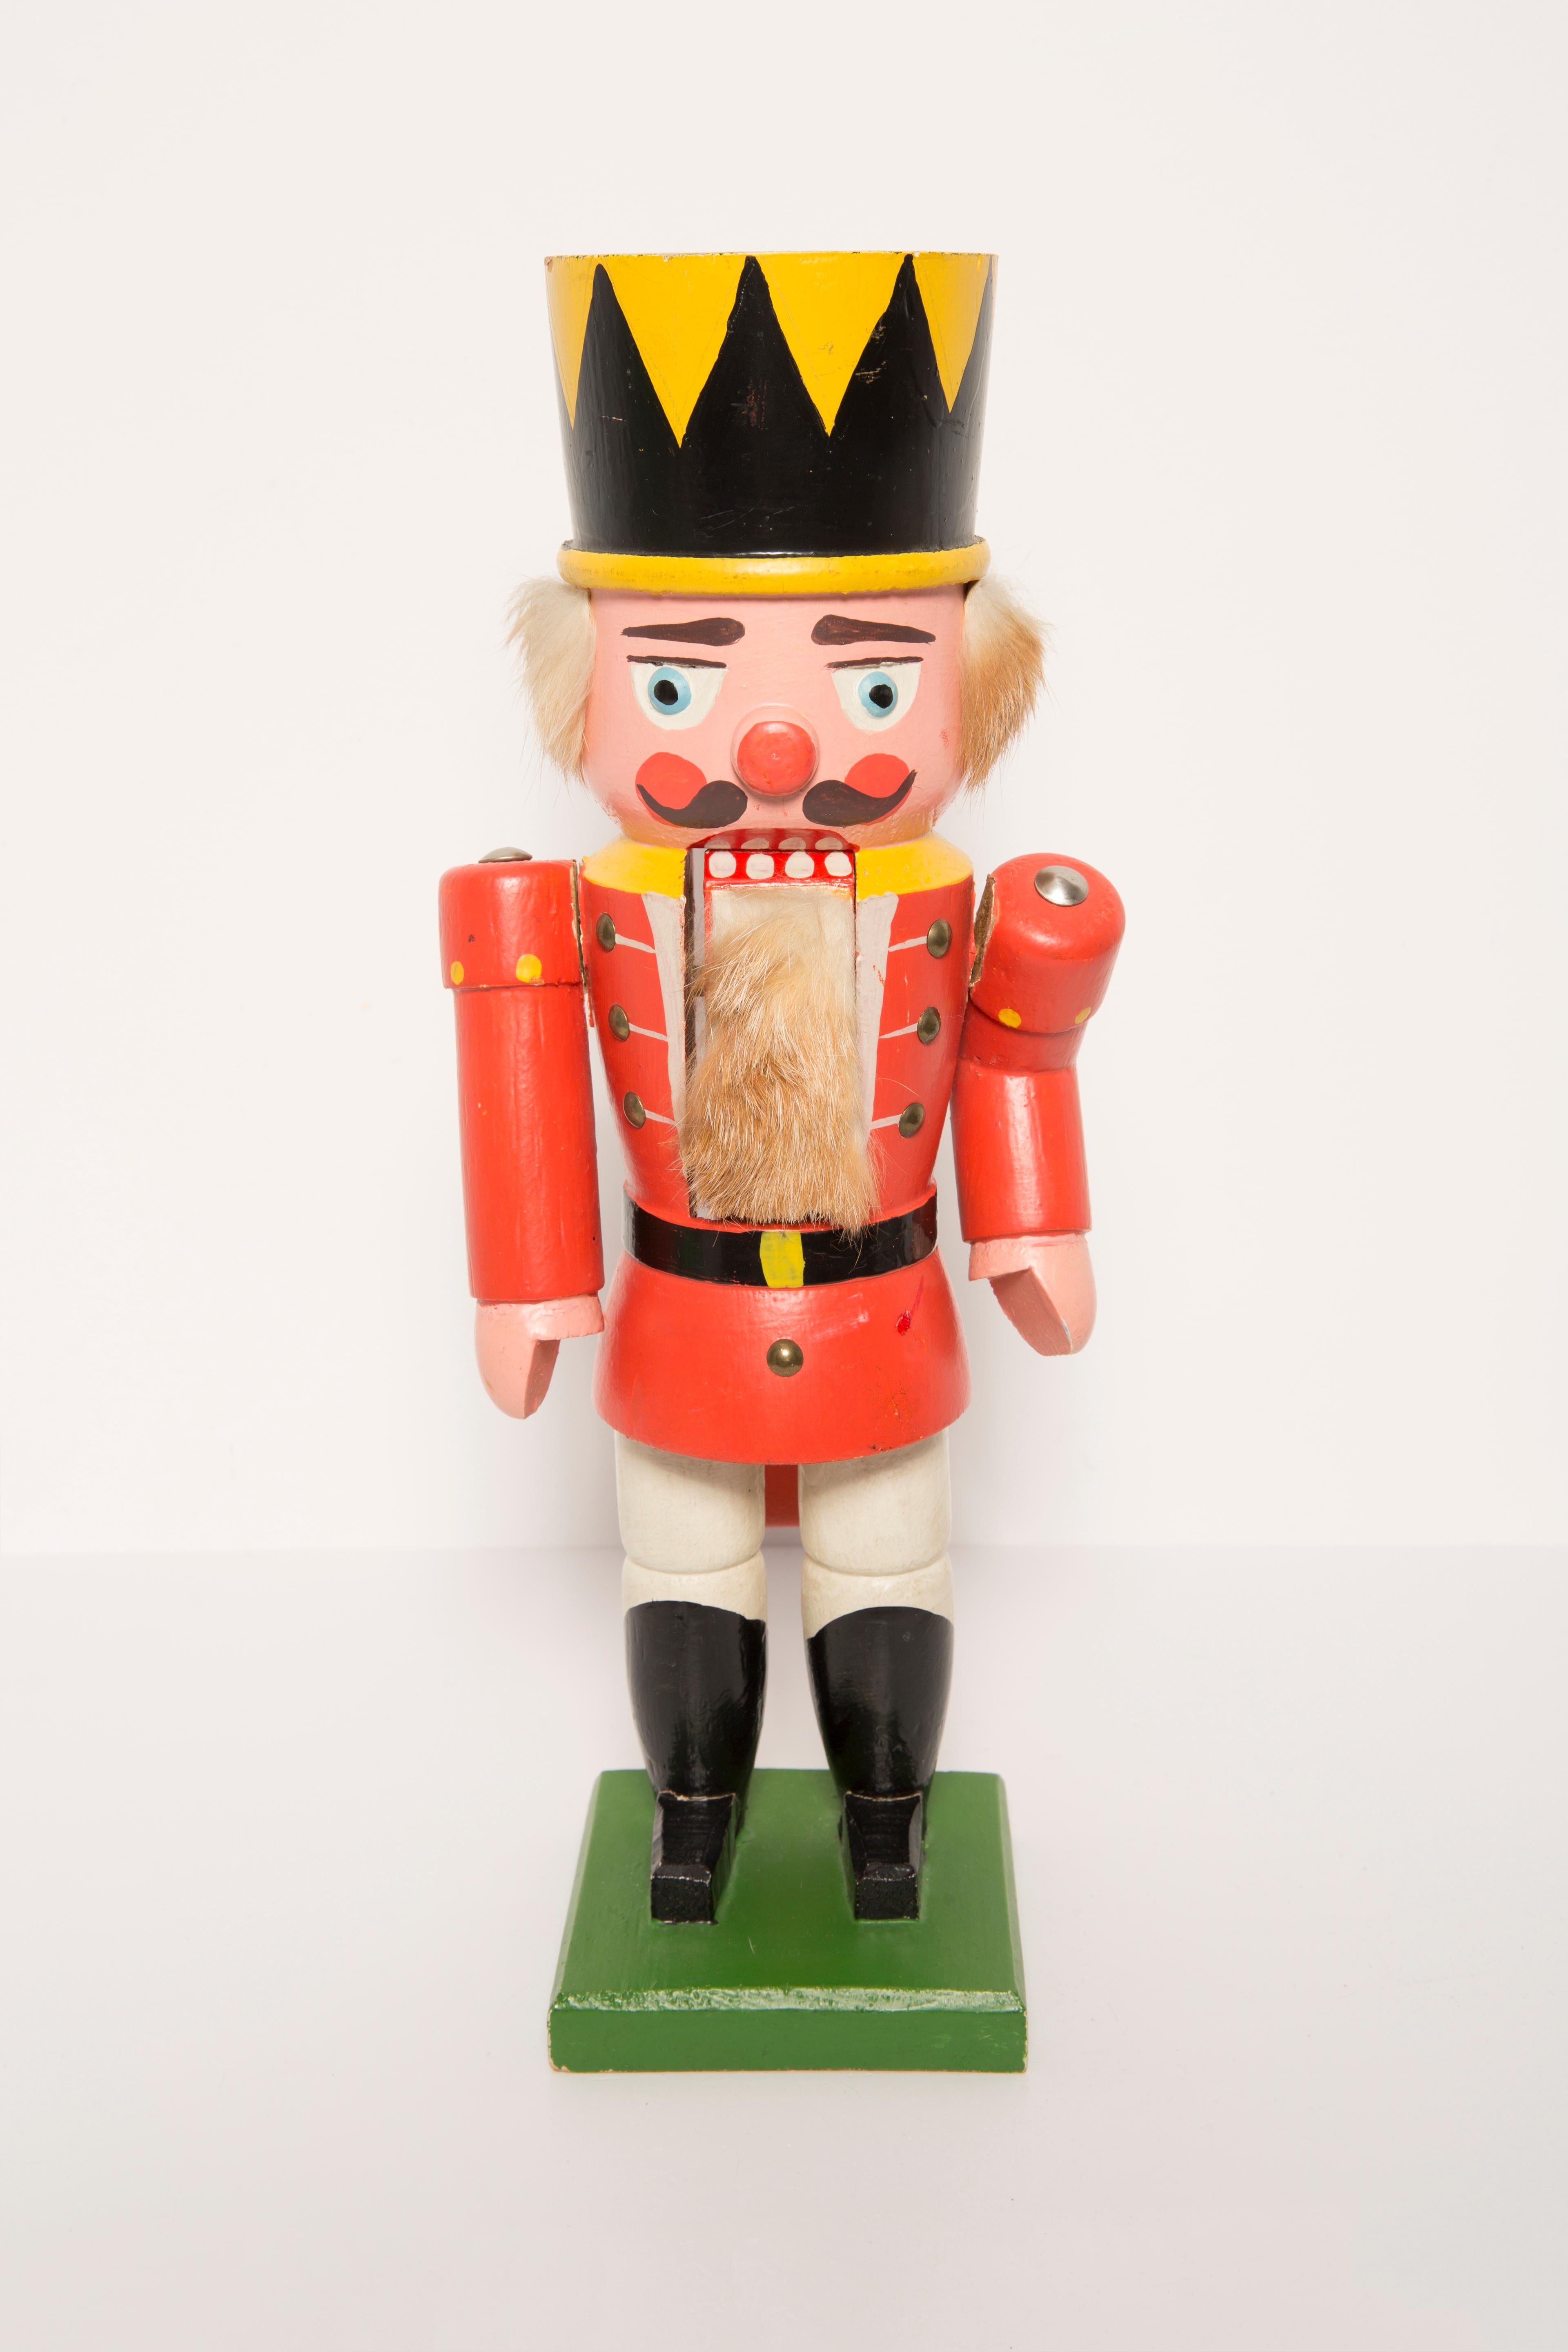 Big wooden nutcracker figure from the Erzgebirge. The region Erzgebirge formerly Eastern Germany is famous for this special kind of nutcrackers, where intricate carving has been their home. Completely hand-painted in bright colors and decorated with